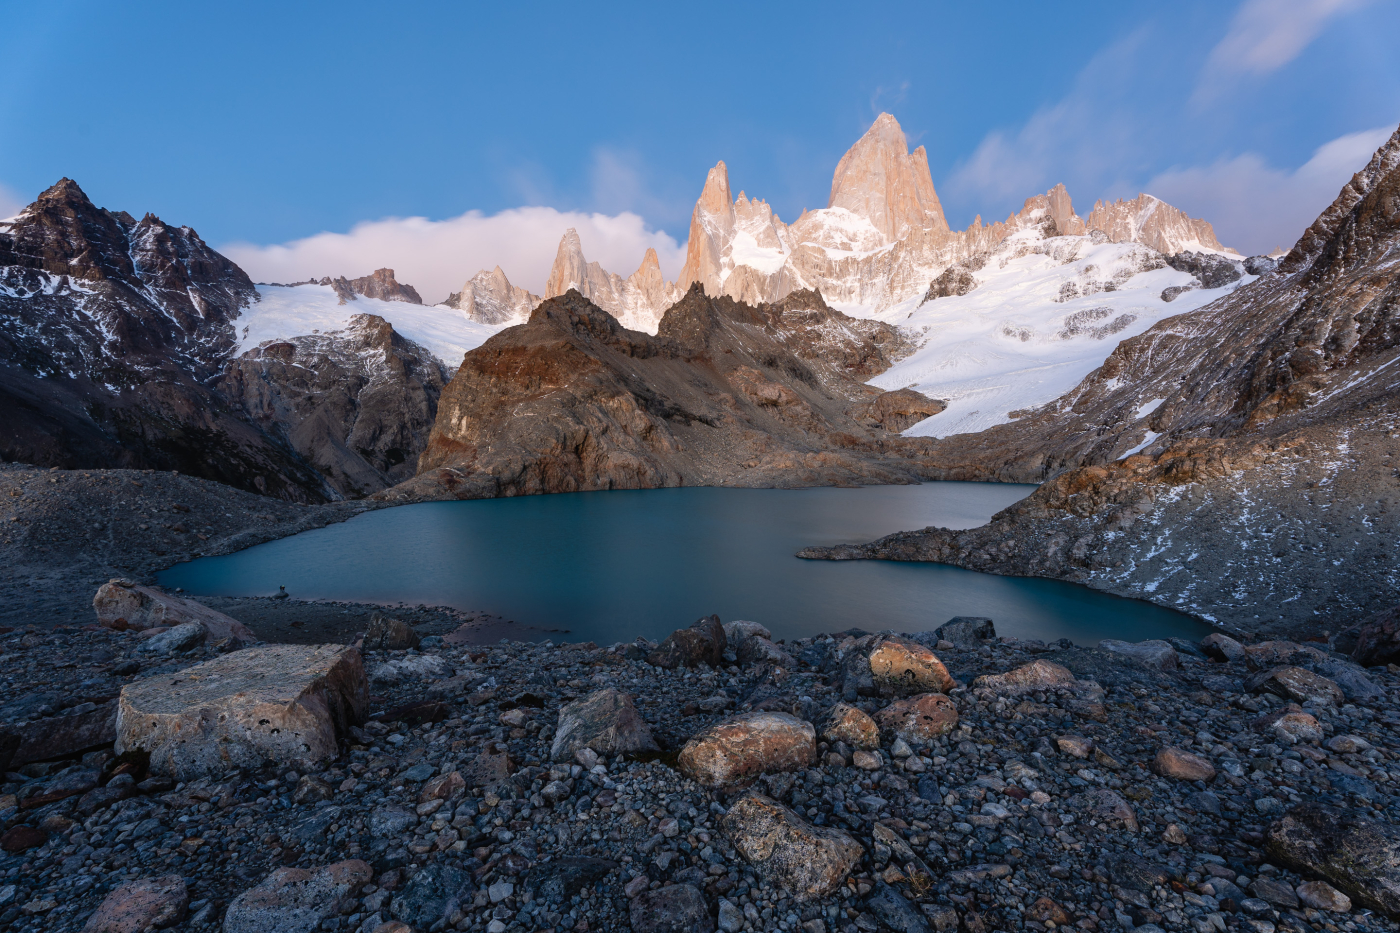 From pampa to glaciers through the Argentine Patagonia